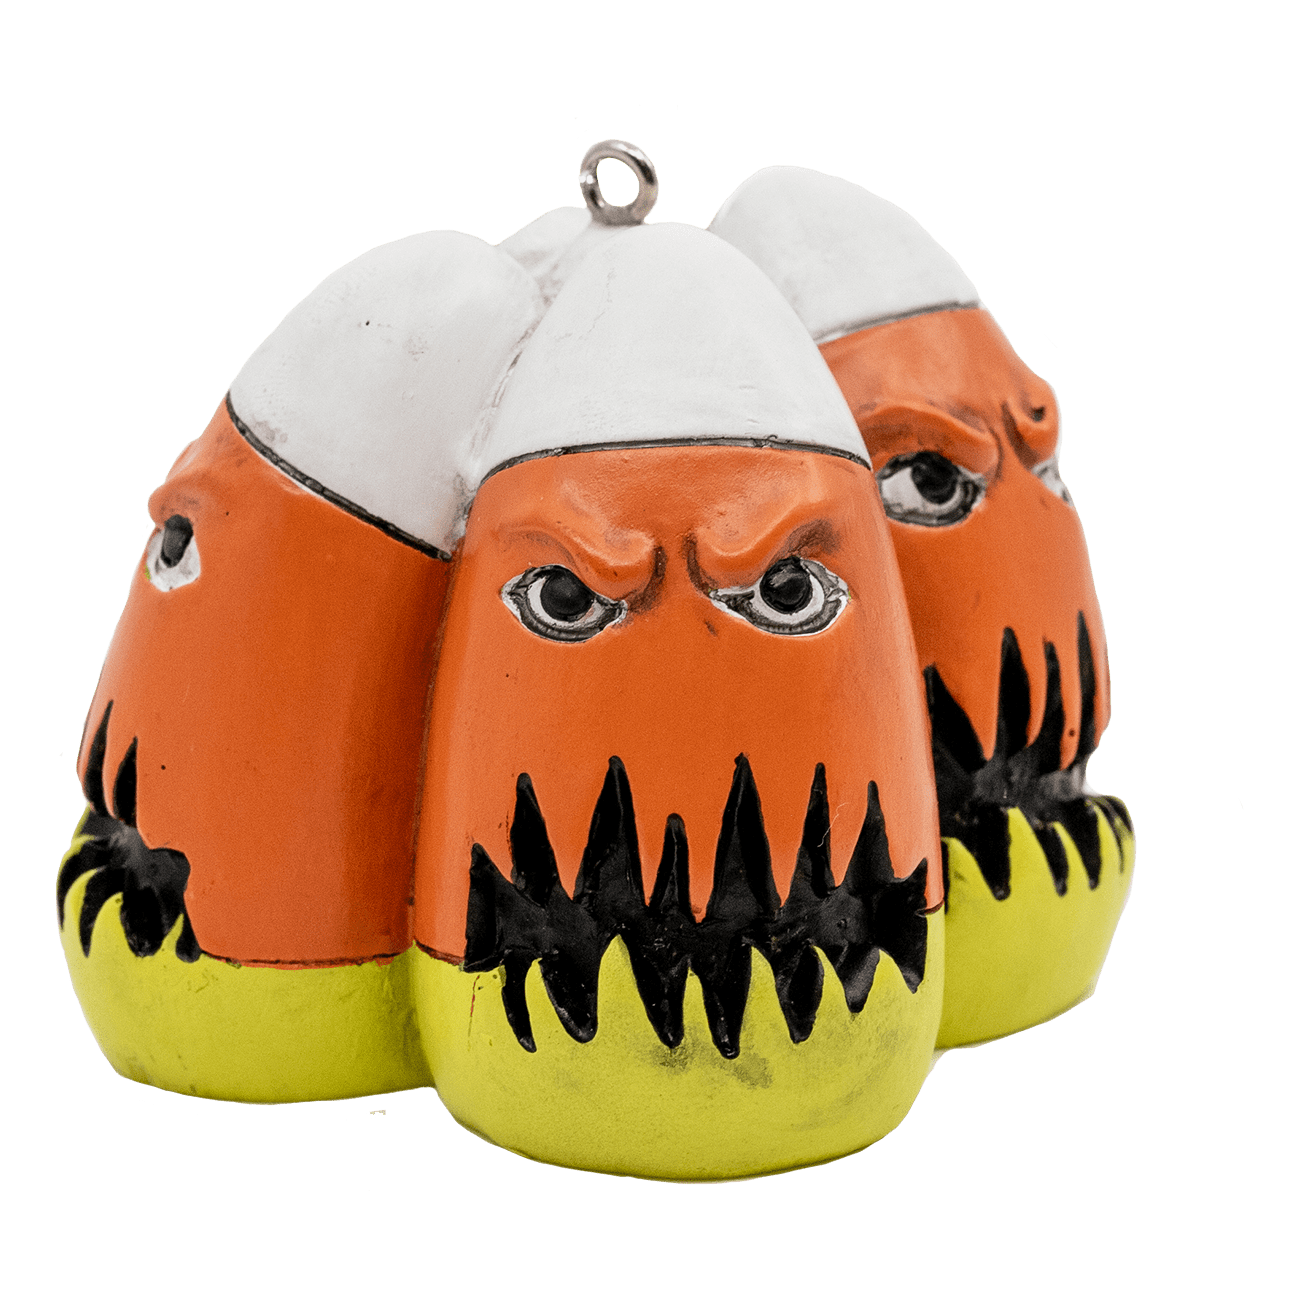 Angry Candy Corn